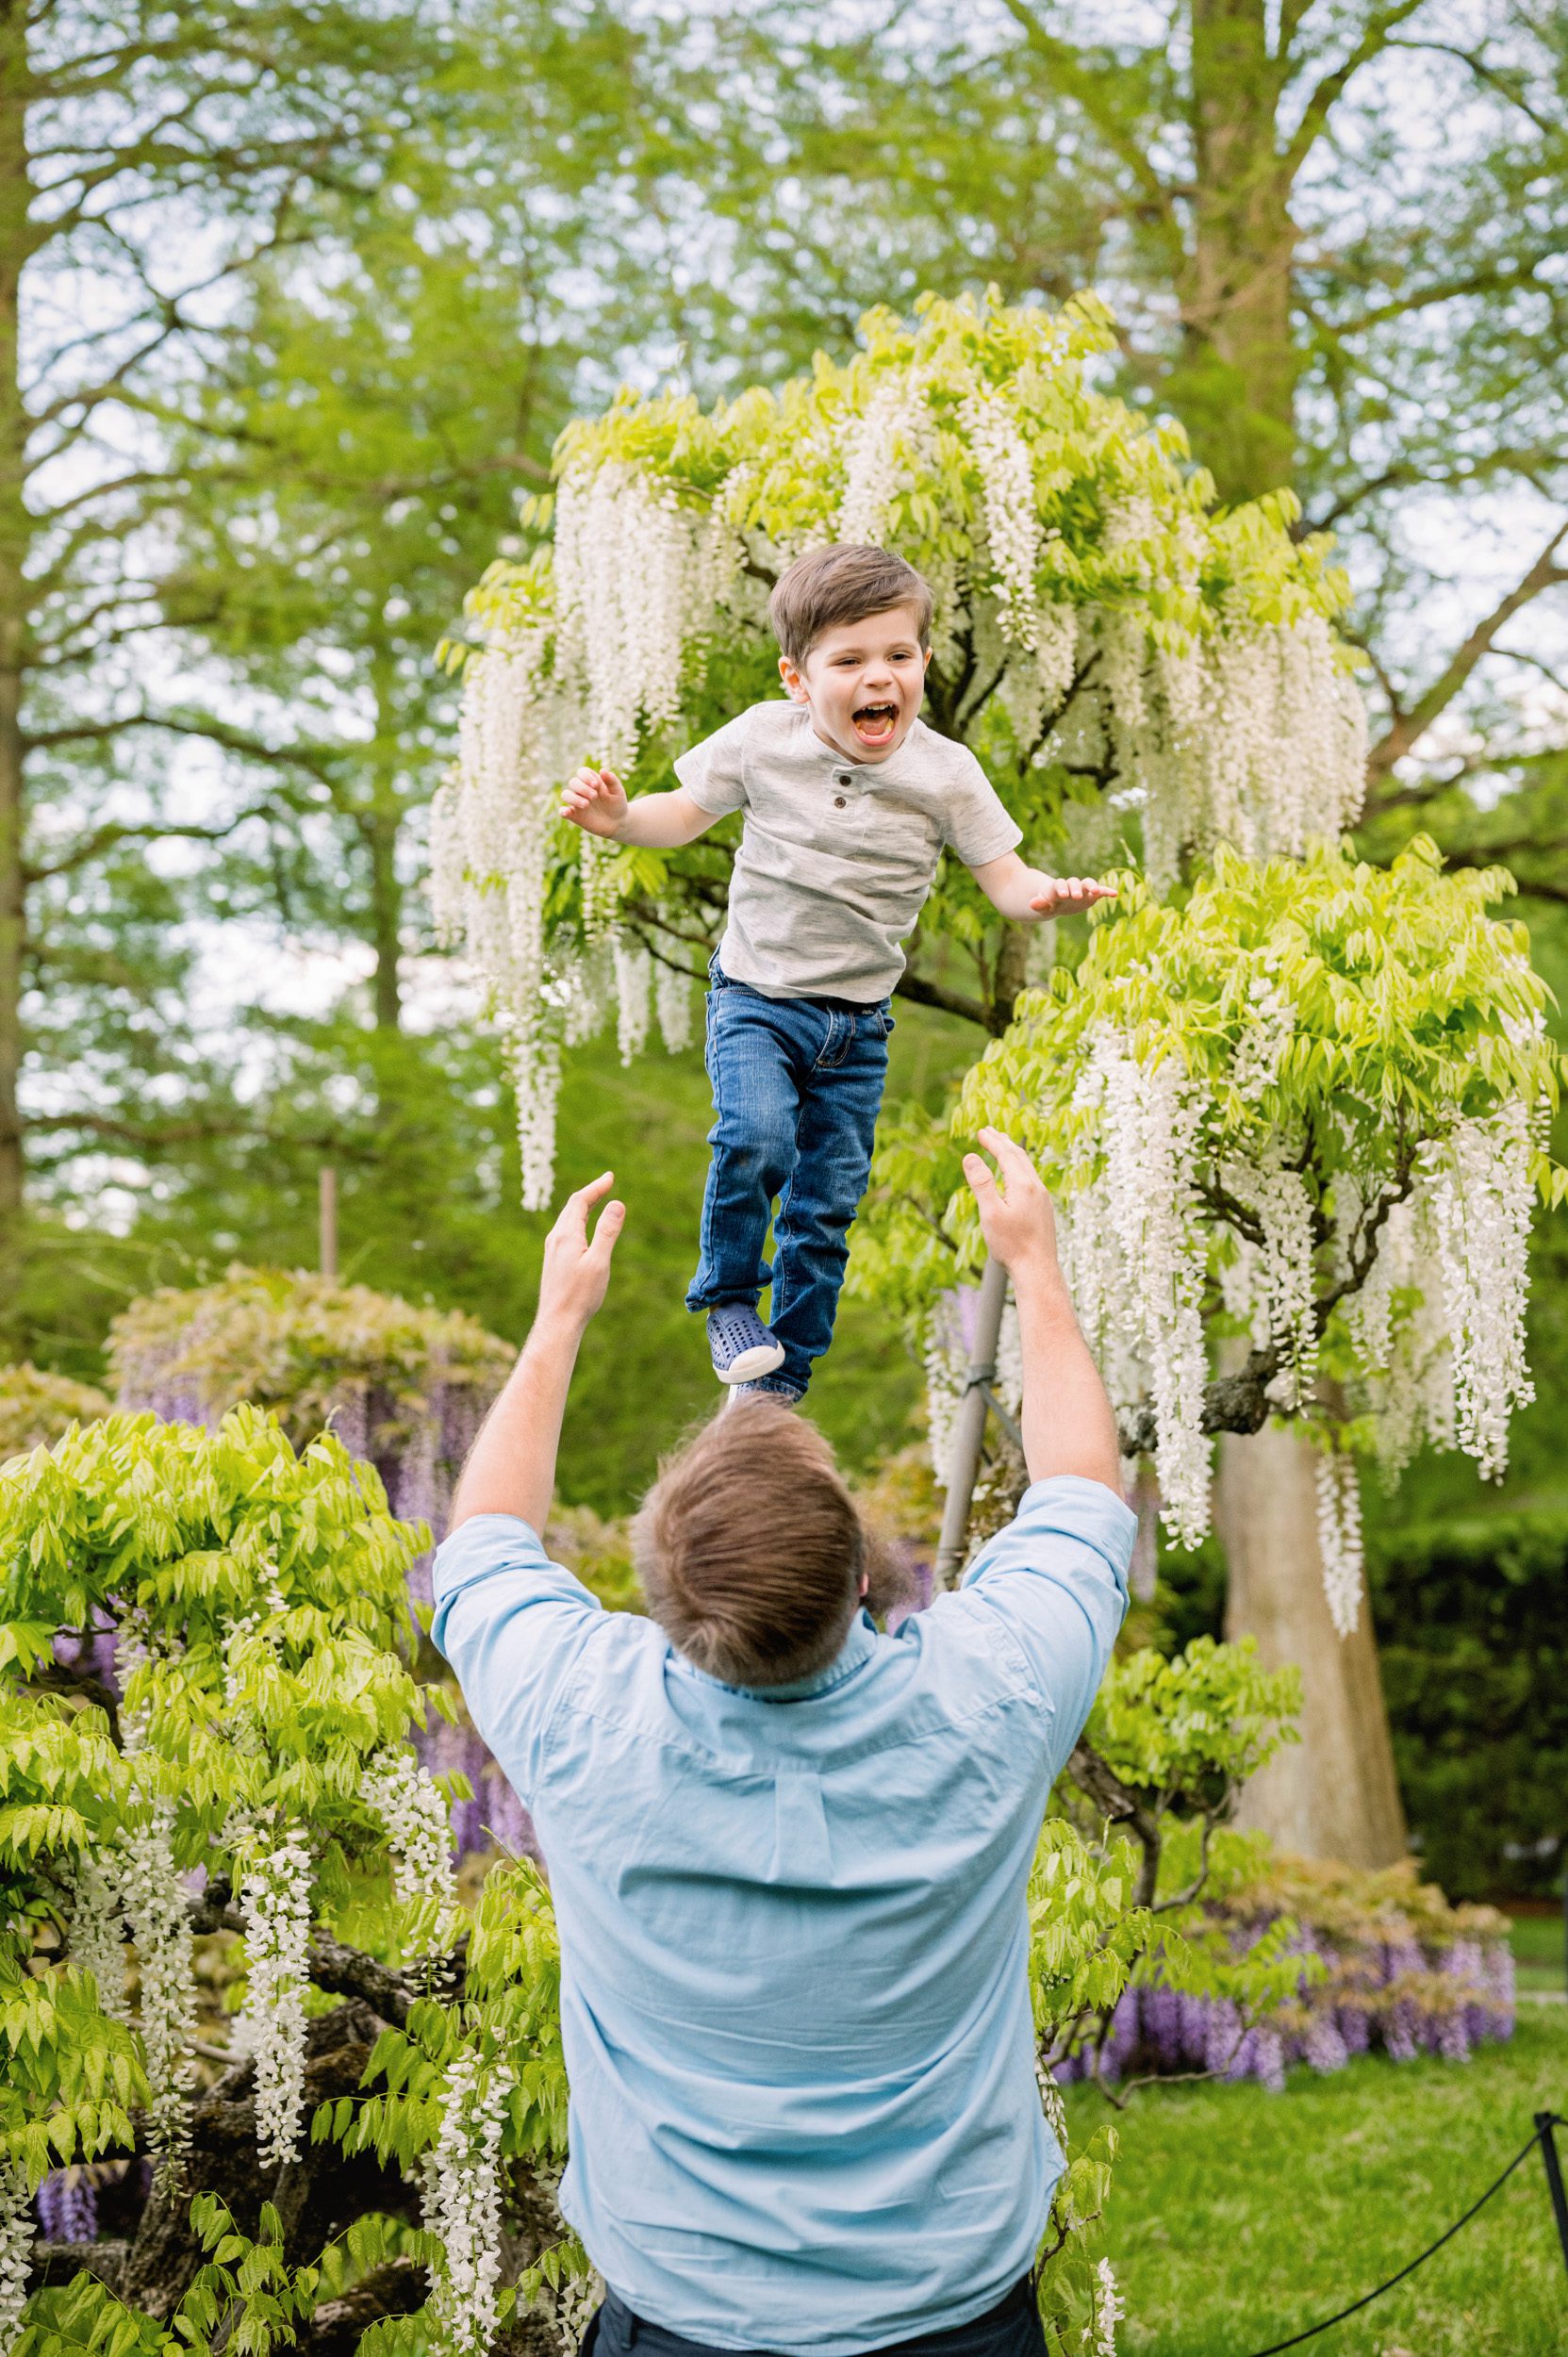 A young boy laughing as his father throws him up in the air with white Wisteria flowers blooming in the background during a family photoshoot